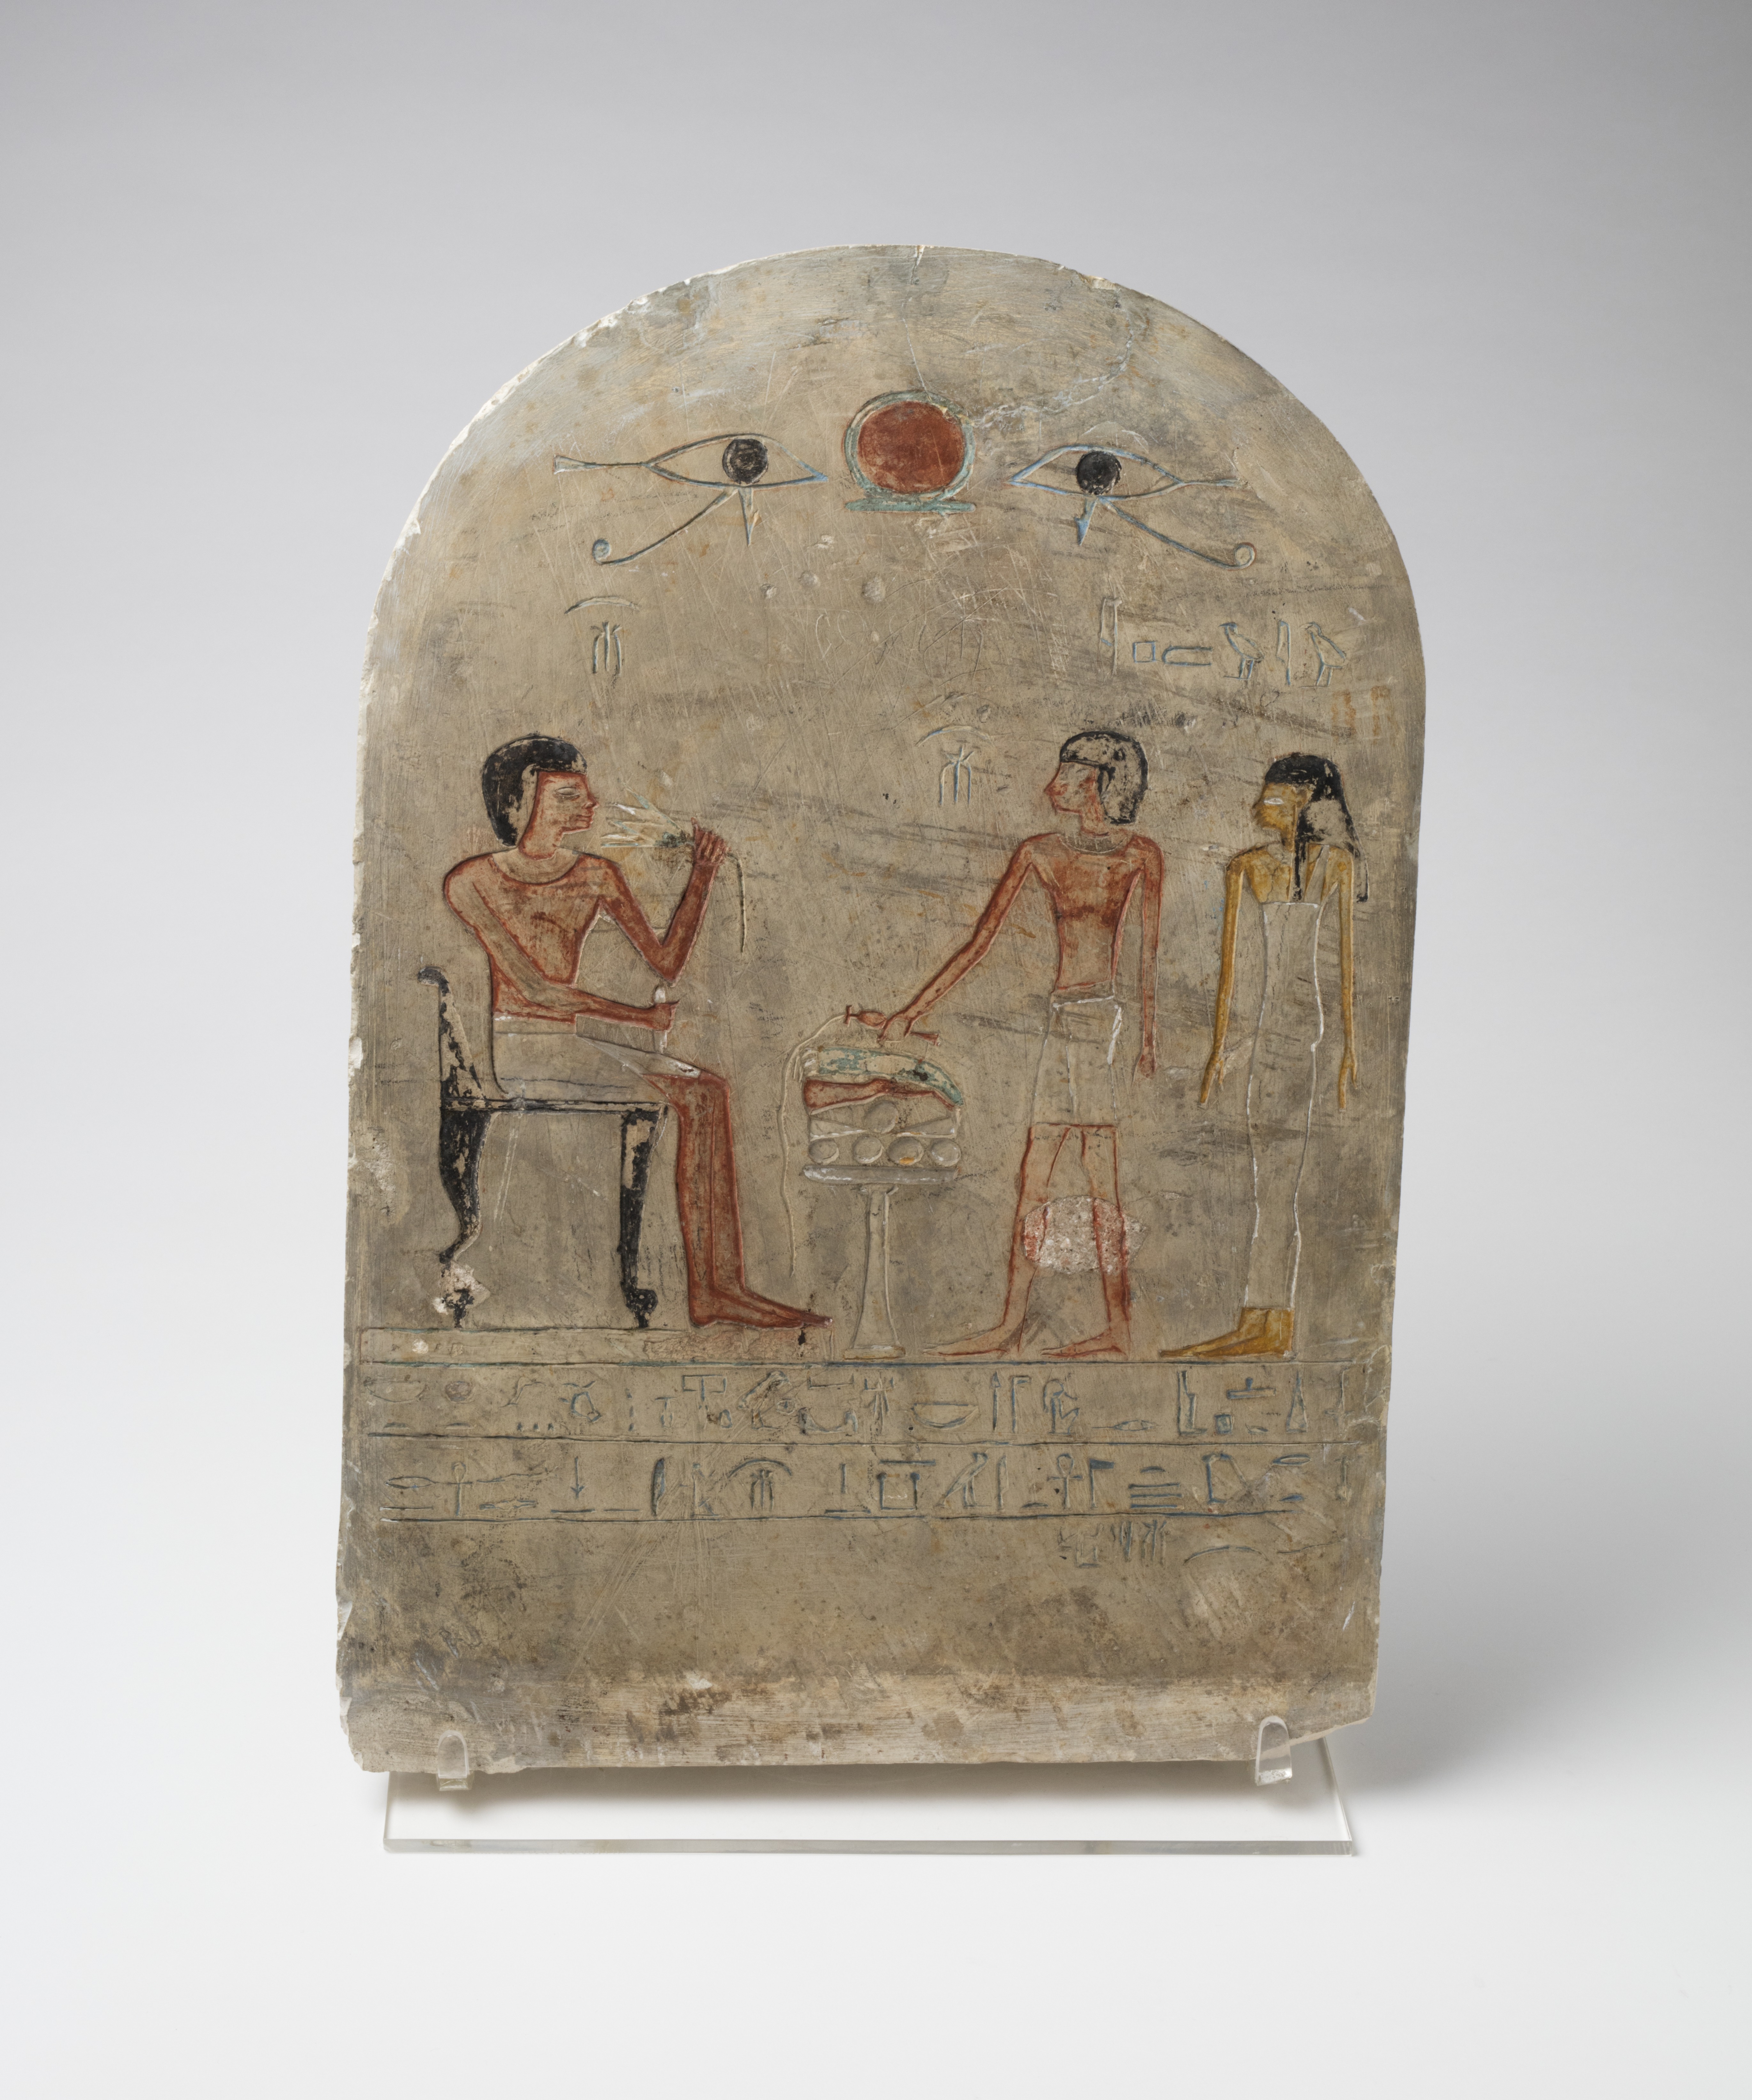 An ancient Egyptian painted stone stelae. A man is seated at a table of food offerings. Two people, a man and a women are presenting him gifts. there is hieroglyphic text below this painting.